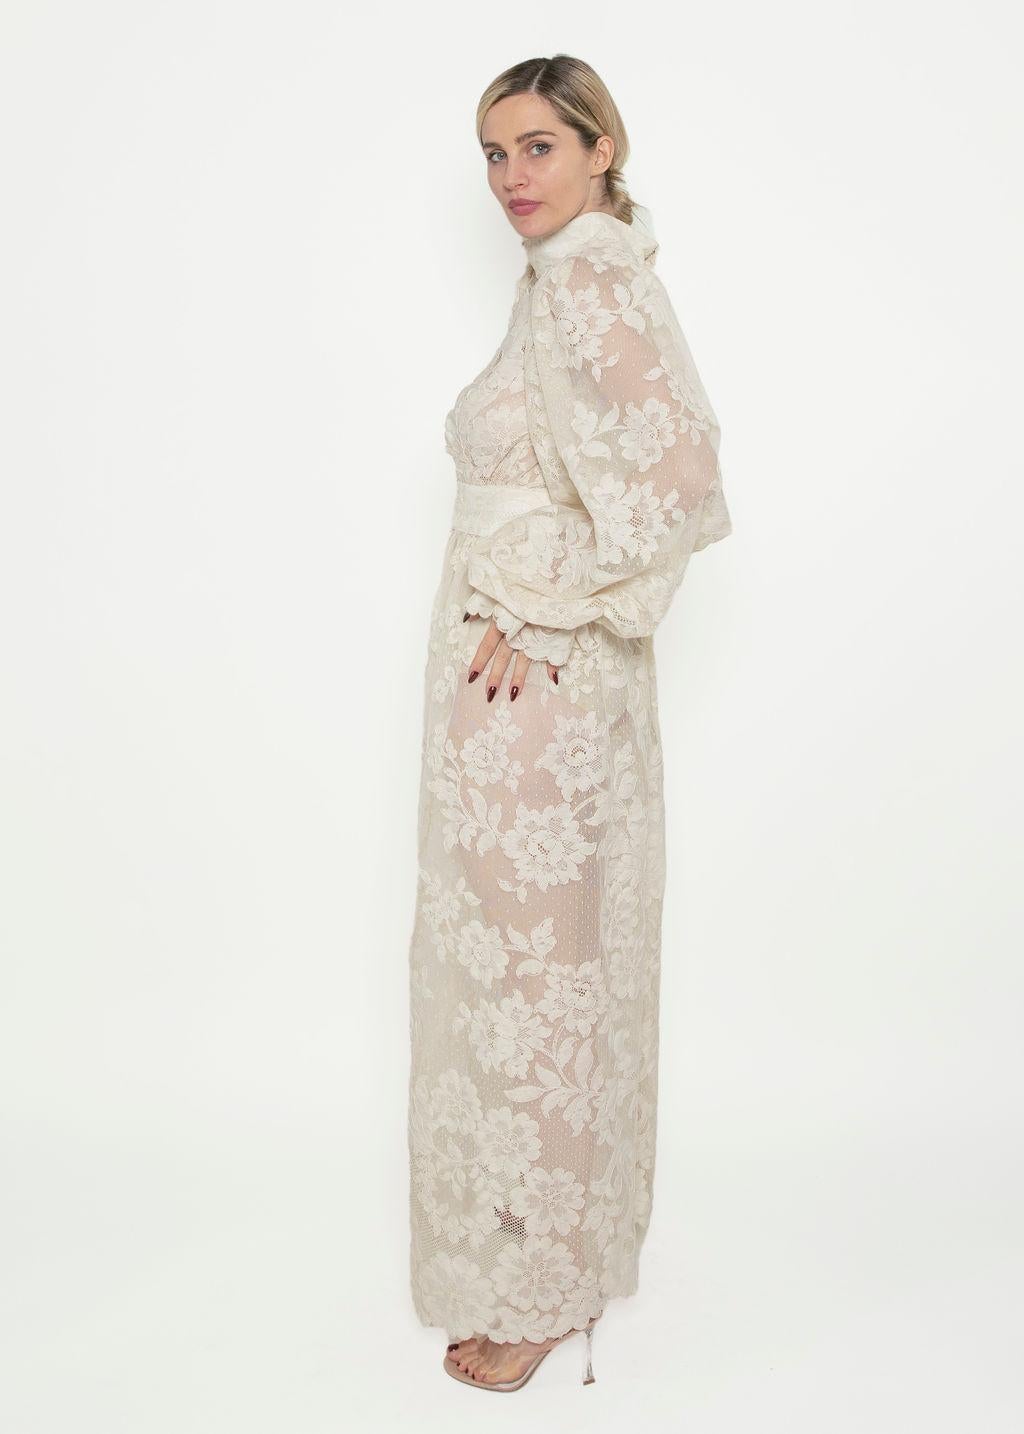 Our stunning 1970's white lace gown features a beautiful full floral lace fabric and a mock neck design.  It is complete with a keyhole chest and balloon sleeves which have elastic at its cuffs. A unique open keyhole back adds a touch of elegance